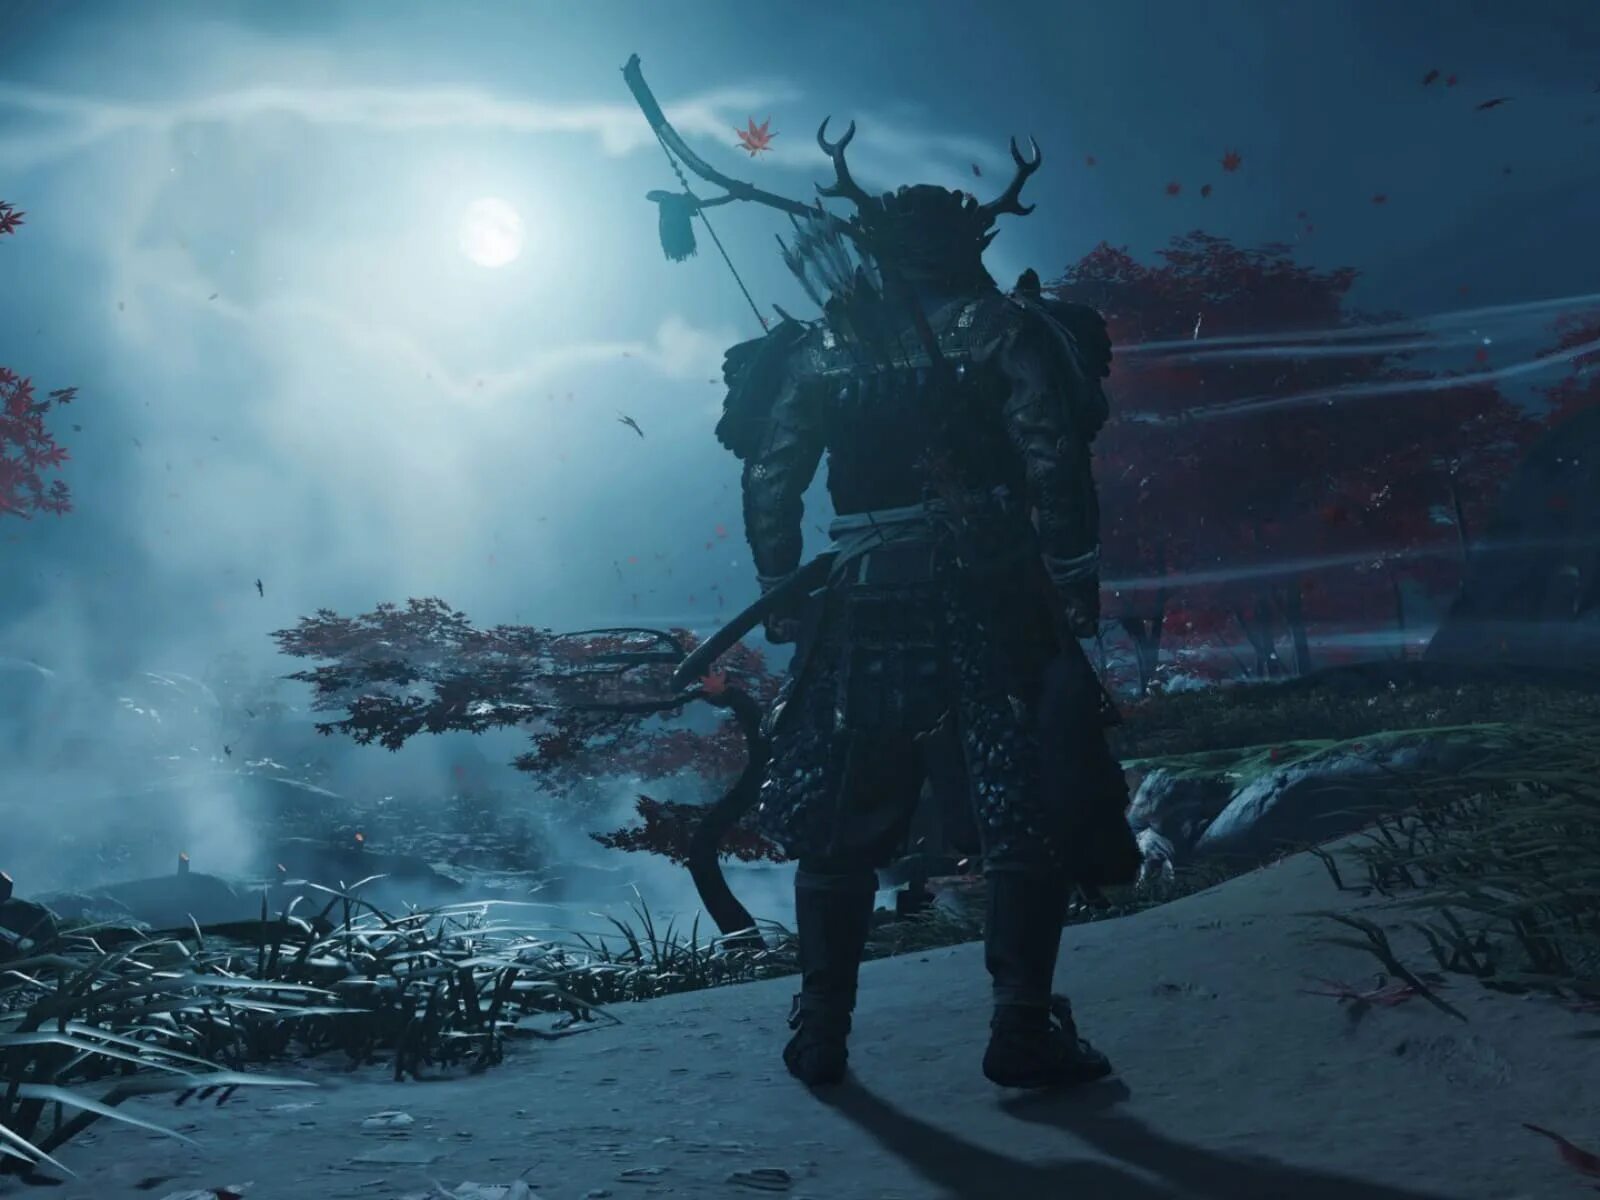 Ghost of tsushima pc system requirements. Игра Ghost of Tsushima. Призрак Цусимы Ghost of Tsushima. Игра призрак Цусимы ps4. Ghost of Tsushima Скриншоты.